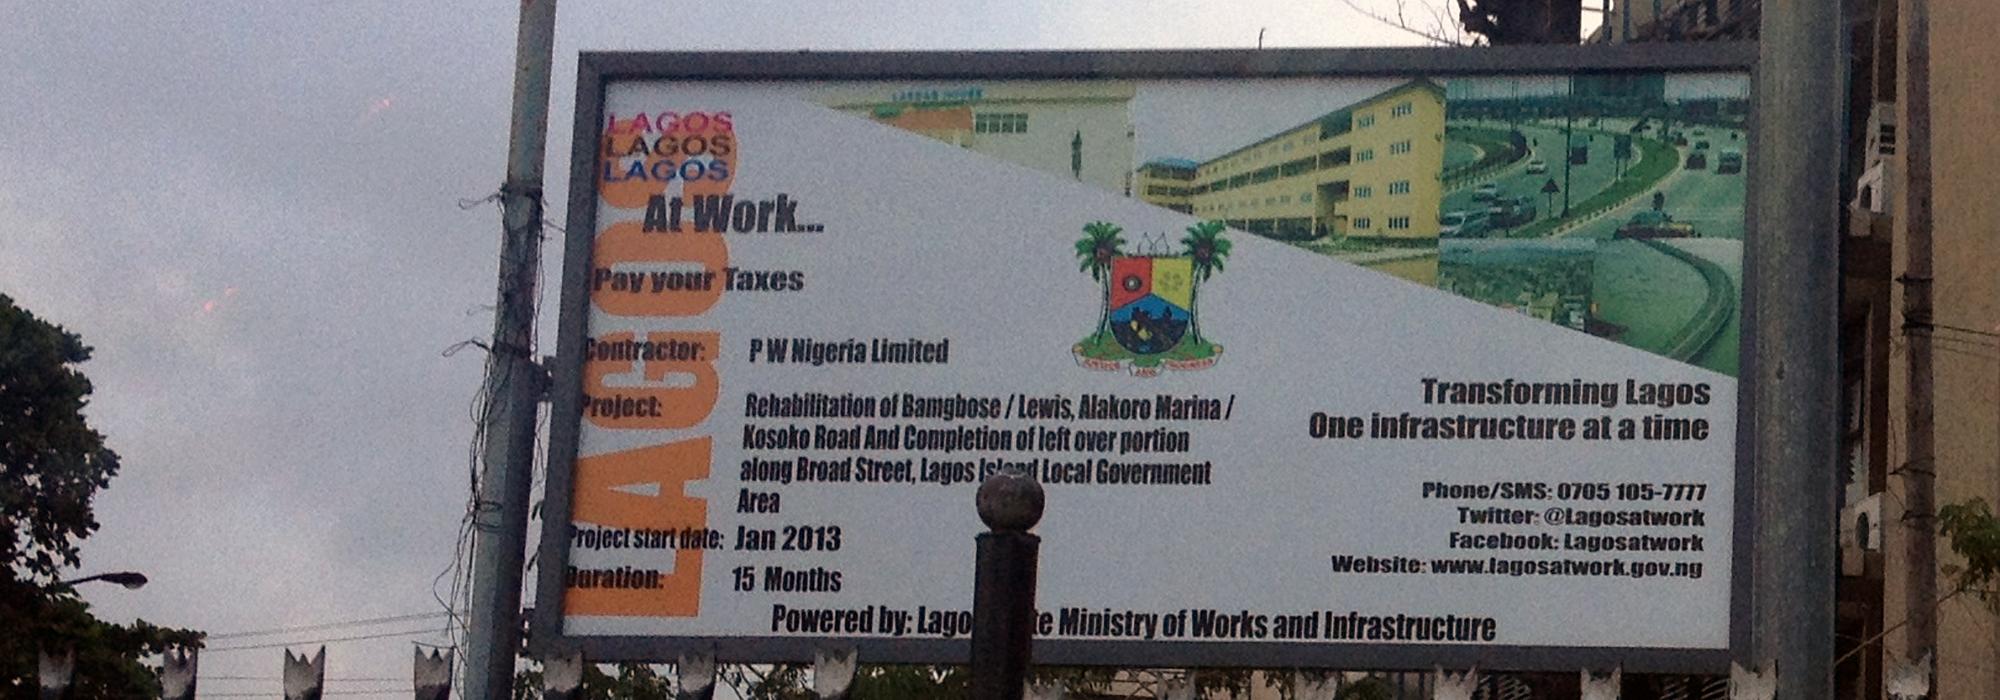 Pay Your Taxes sign in Lagos, Nigeria